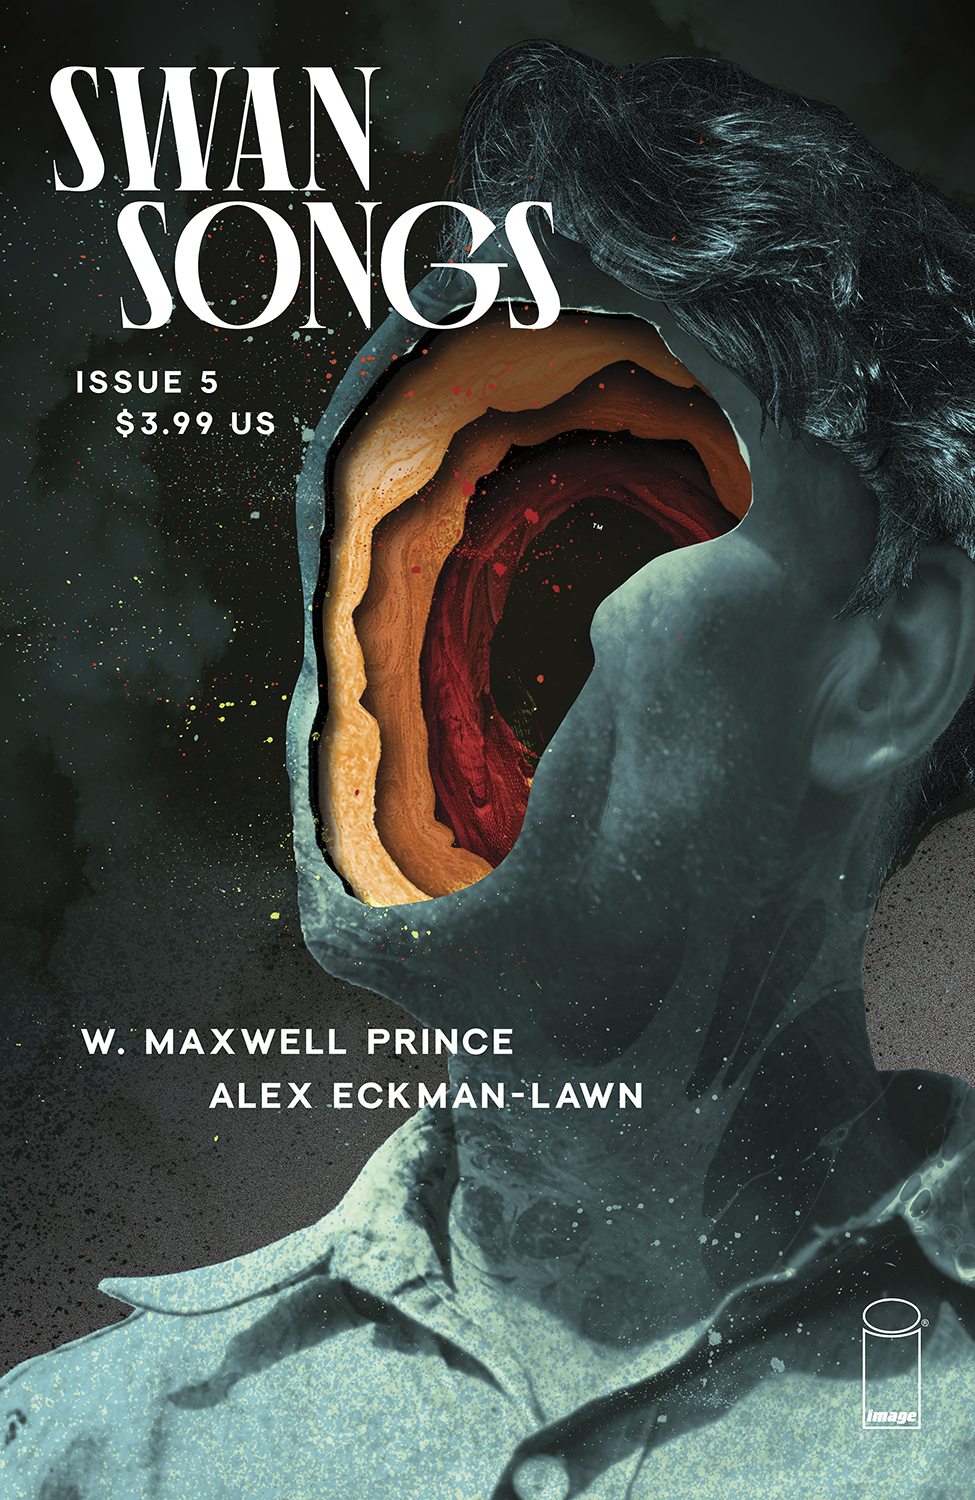 Swan Songs #5 Cover A Alex Eckman-Lawn (Of 6)